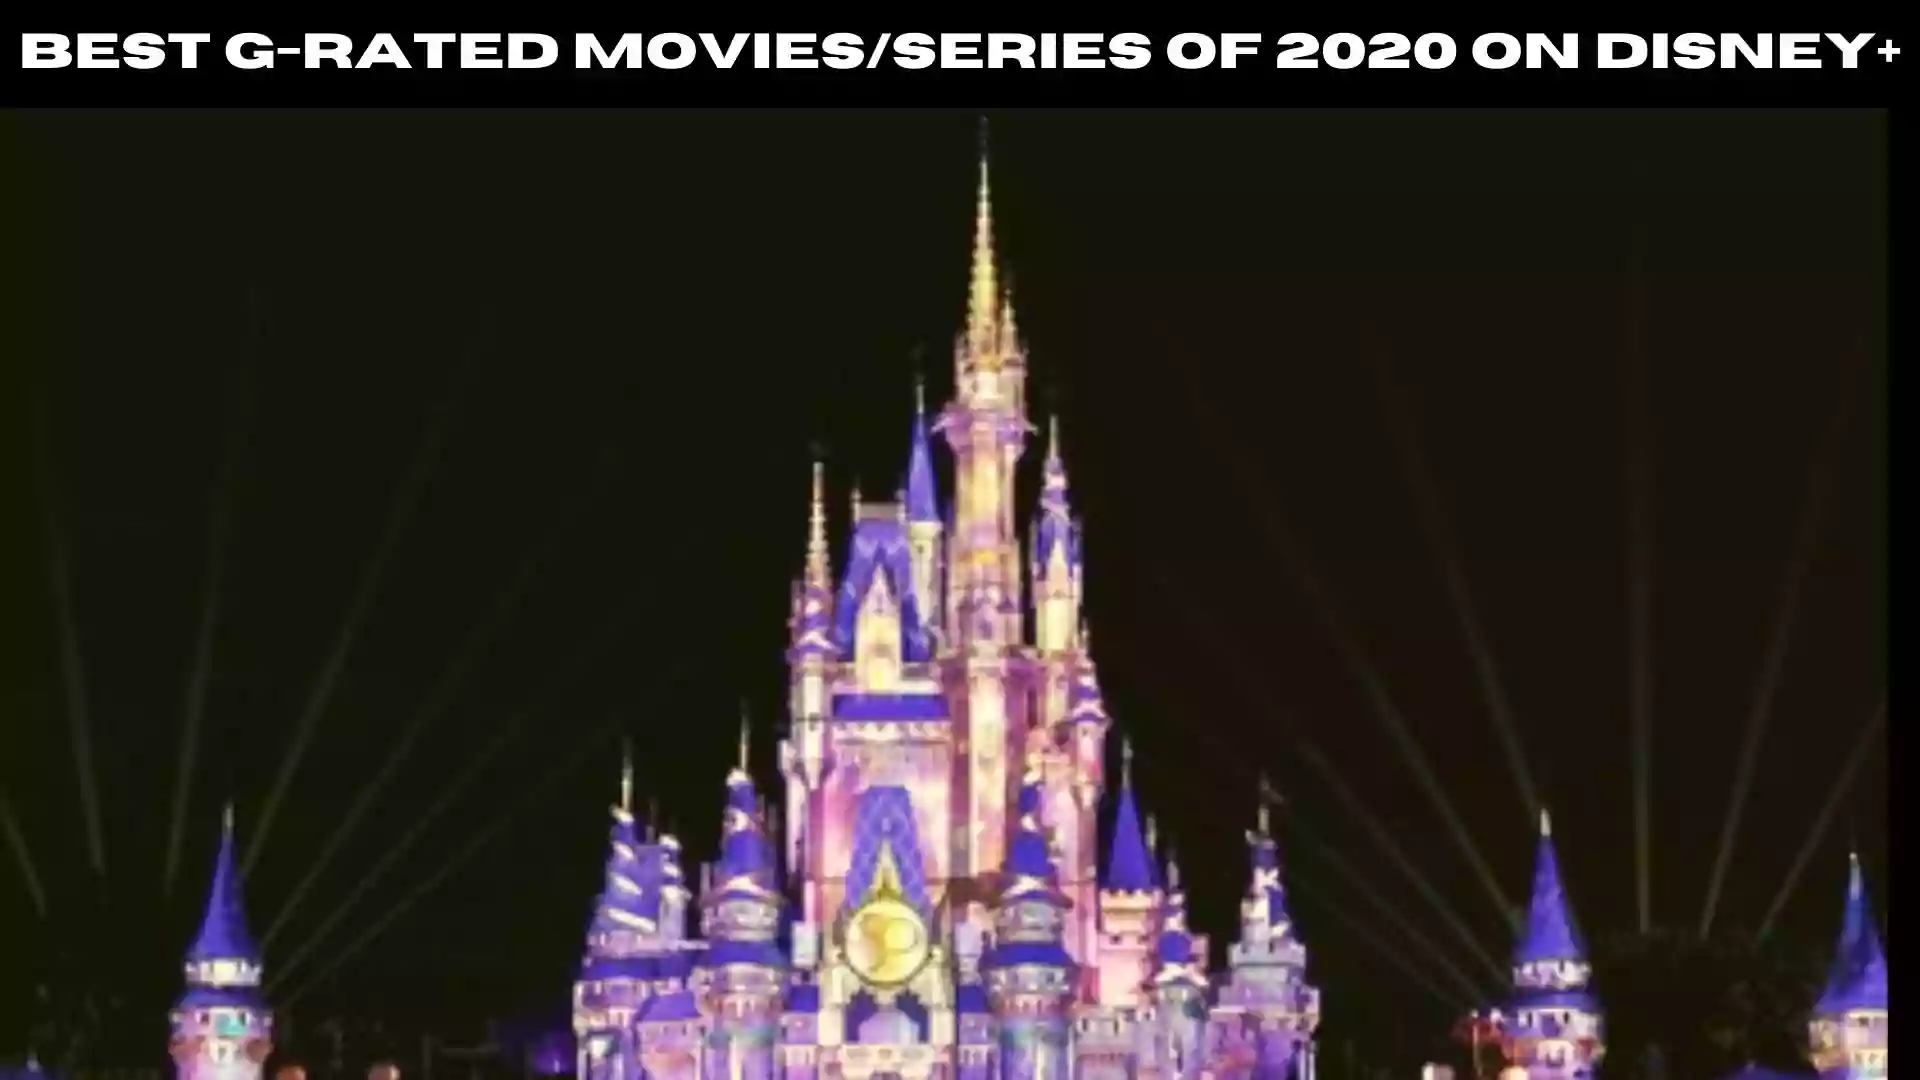 Best G-Rated Movies/series of 2020 on Disney+